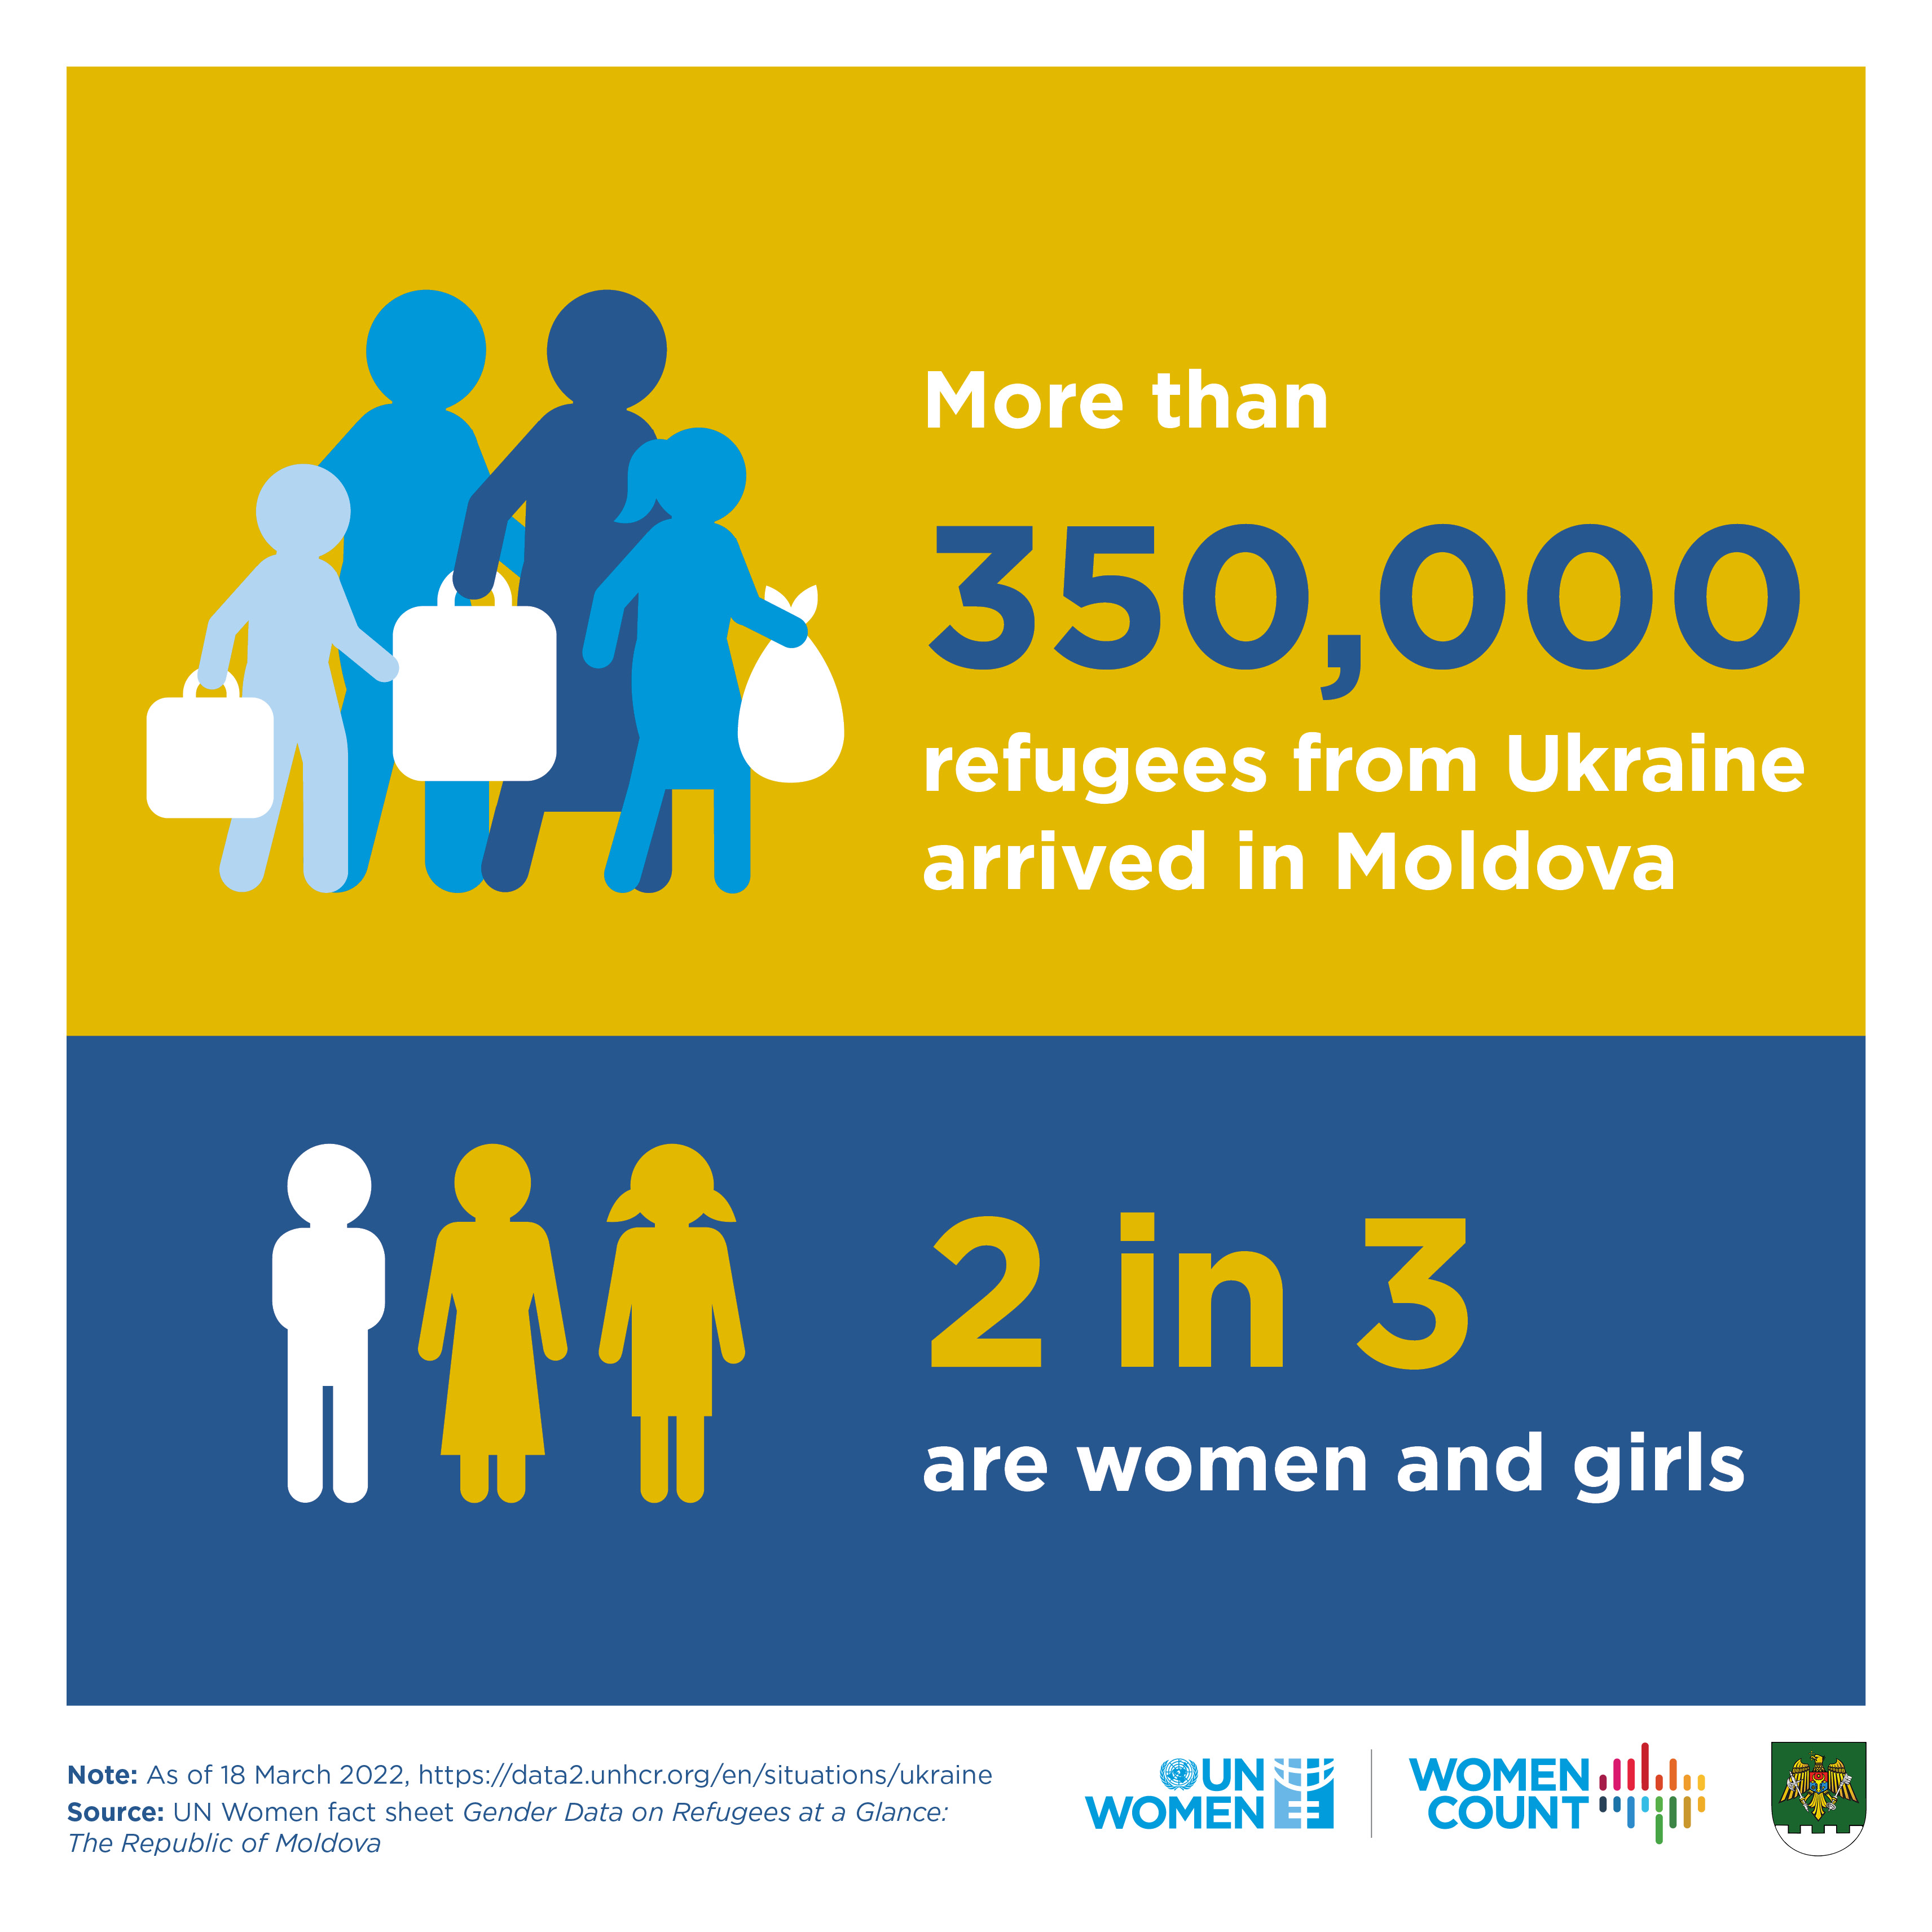 Gender data on refugees at a glance: the Republic of Moldova